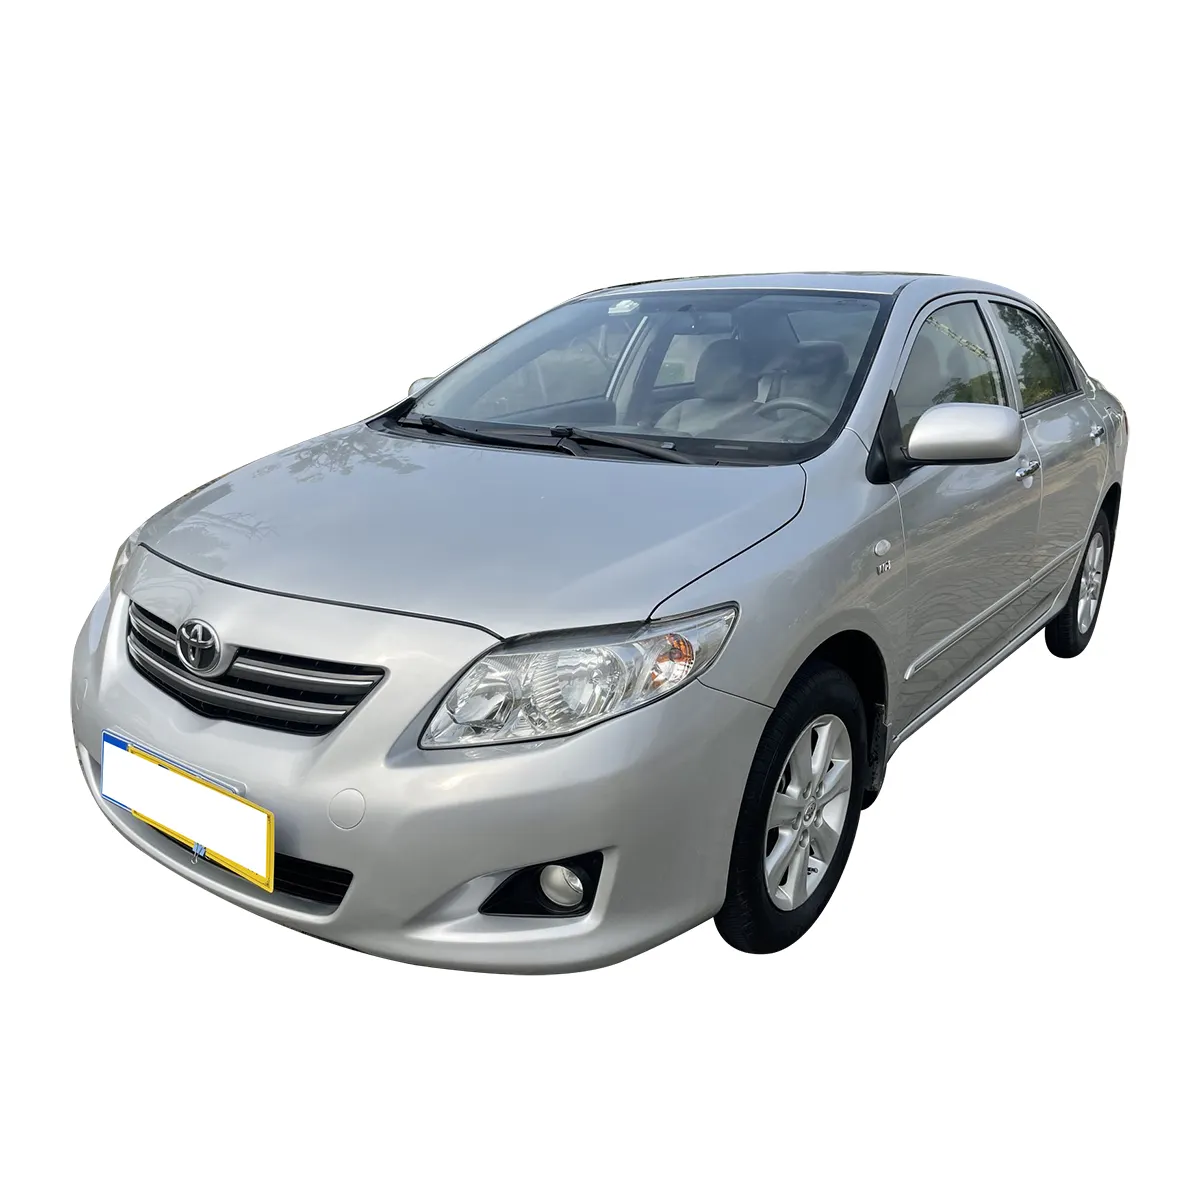 Wholesale 2007 toyota corolla 1.6L auto GL used cars second hand taxi driving school online car-hailing for sale